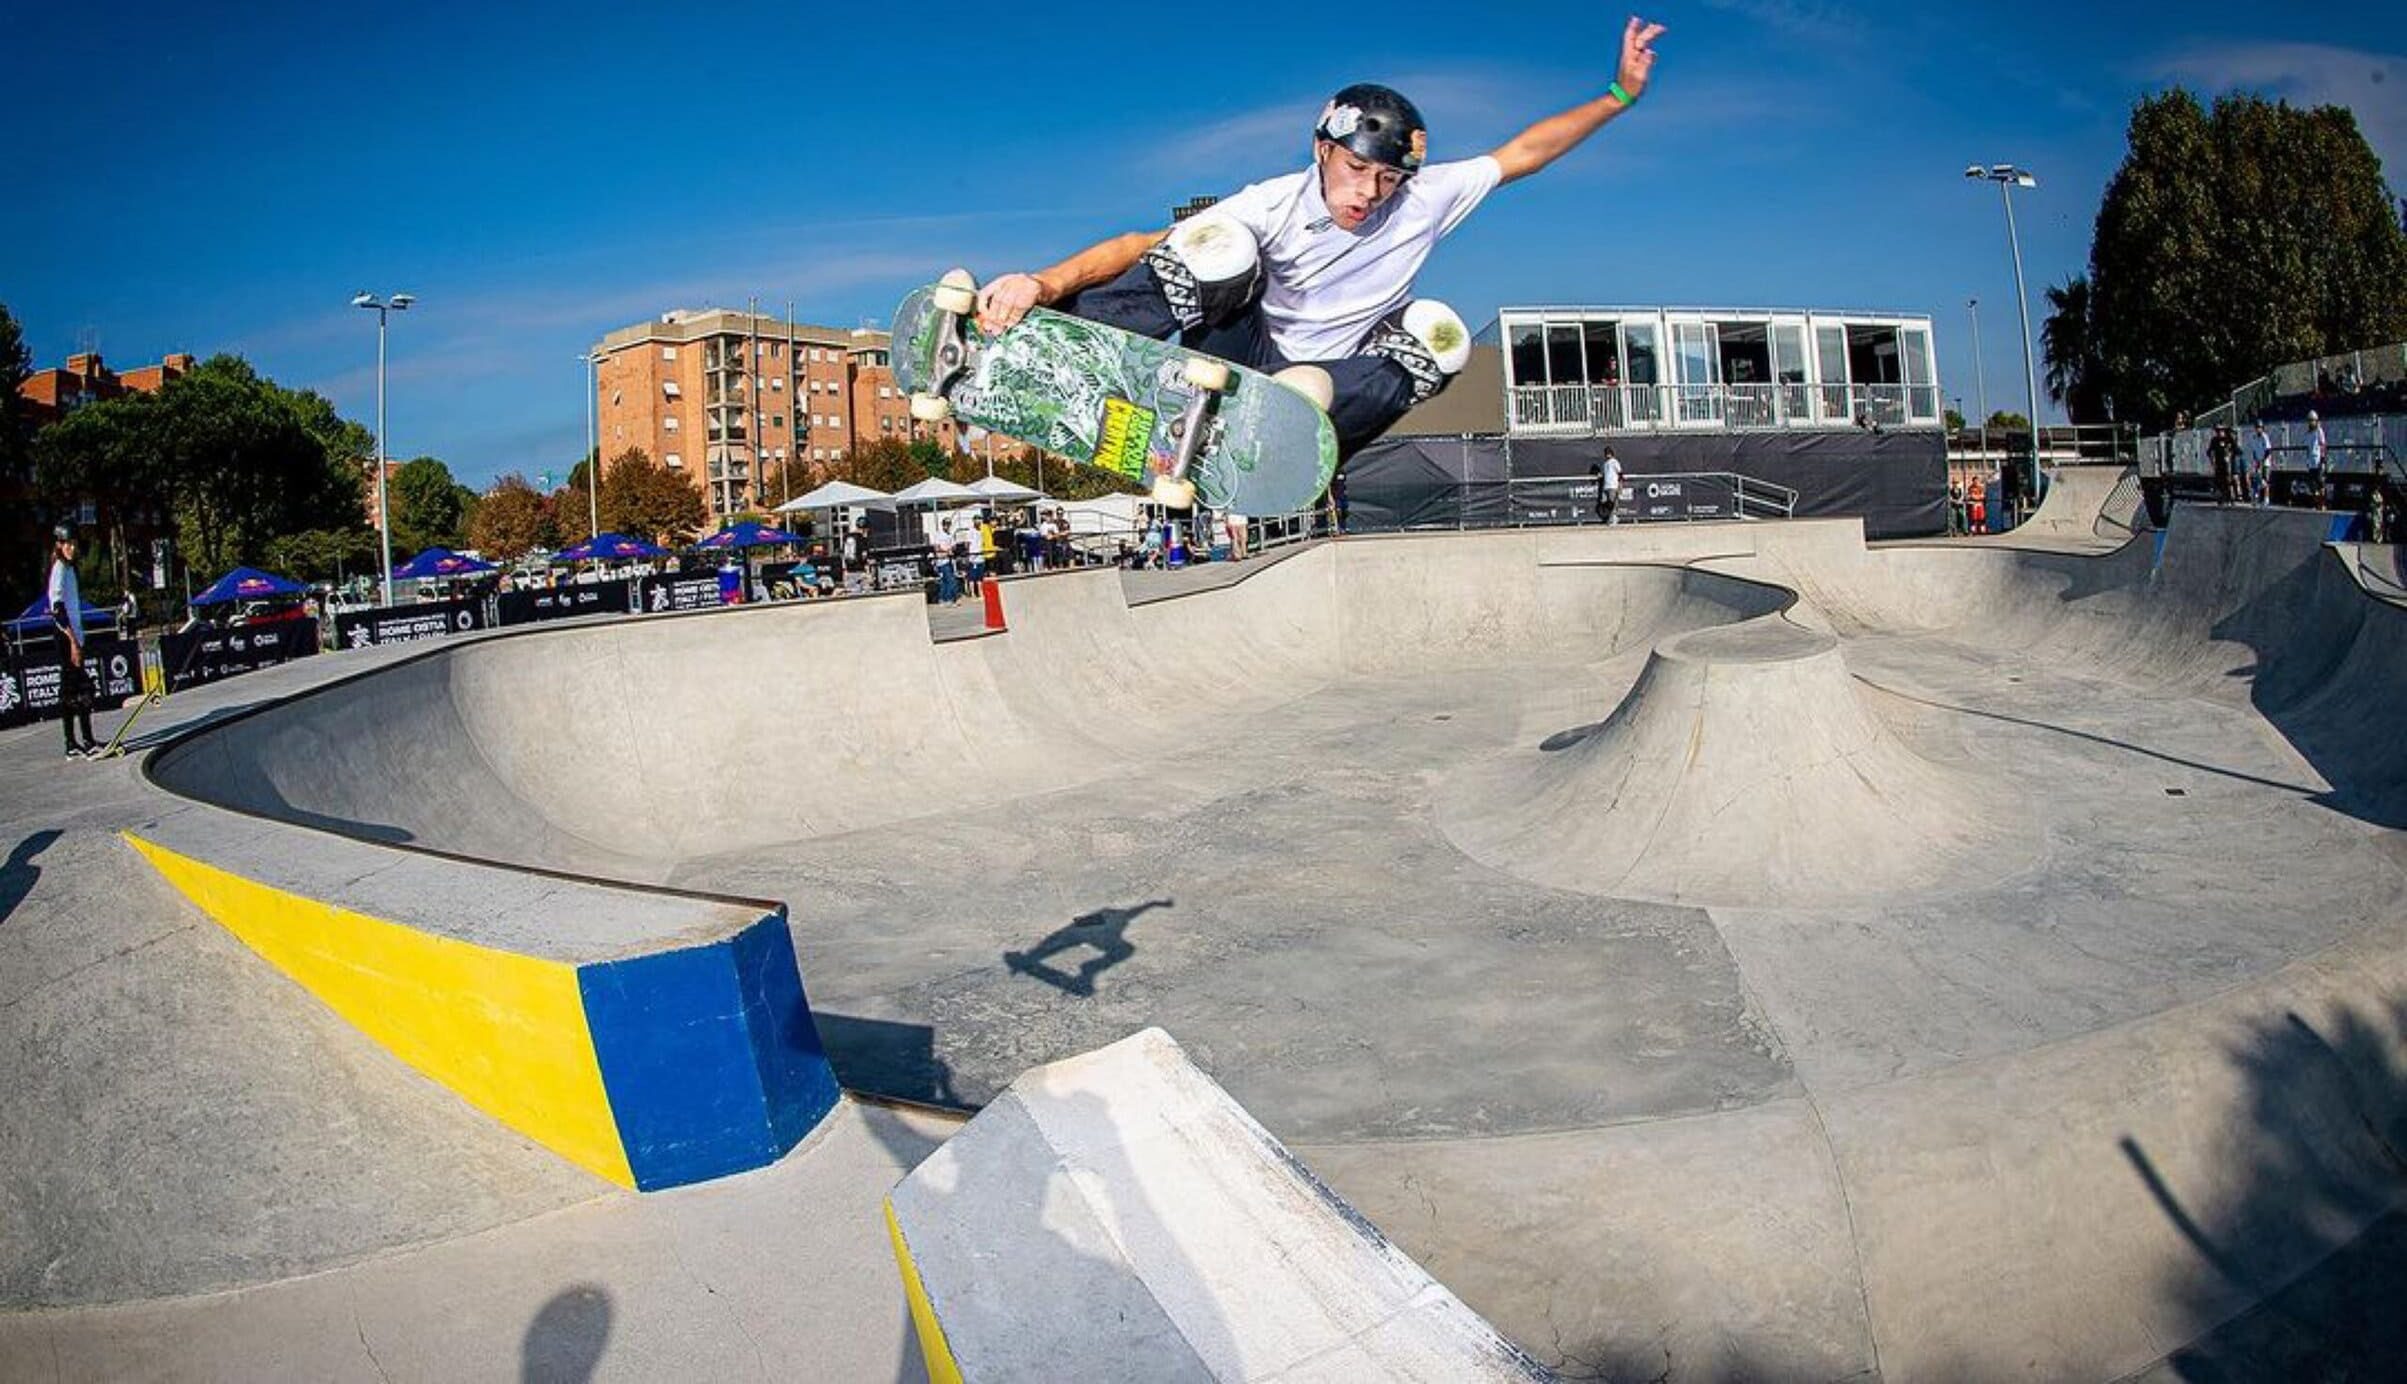 6 Ways to Get Kids off Screens and into Skateboarding